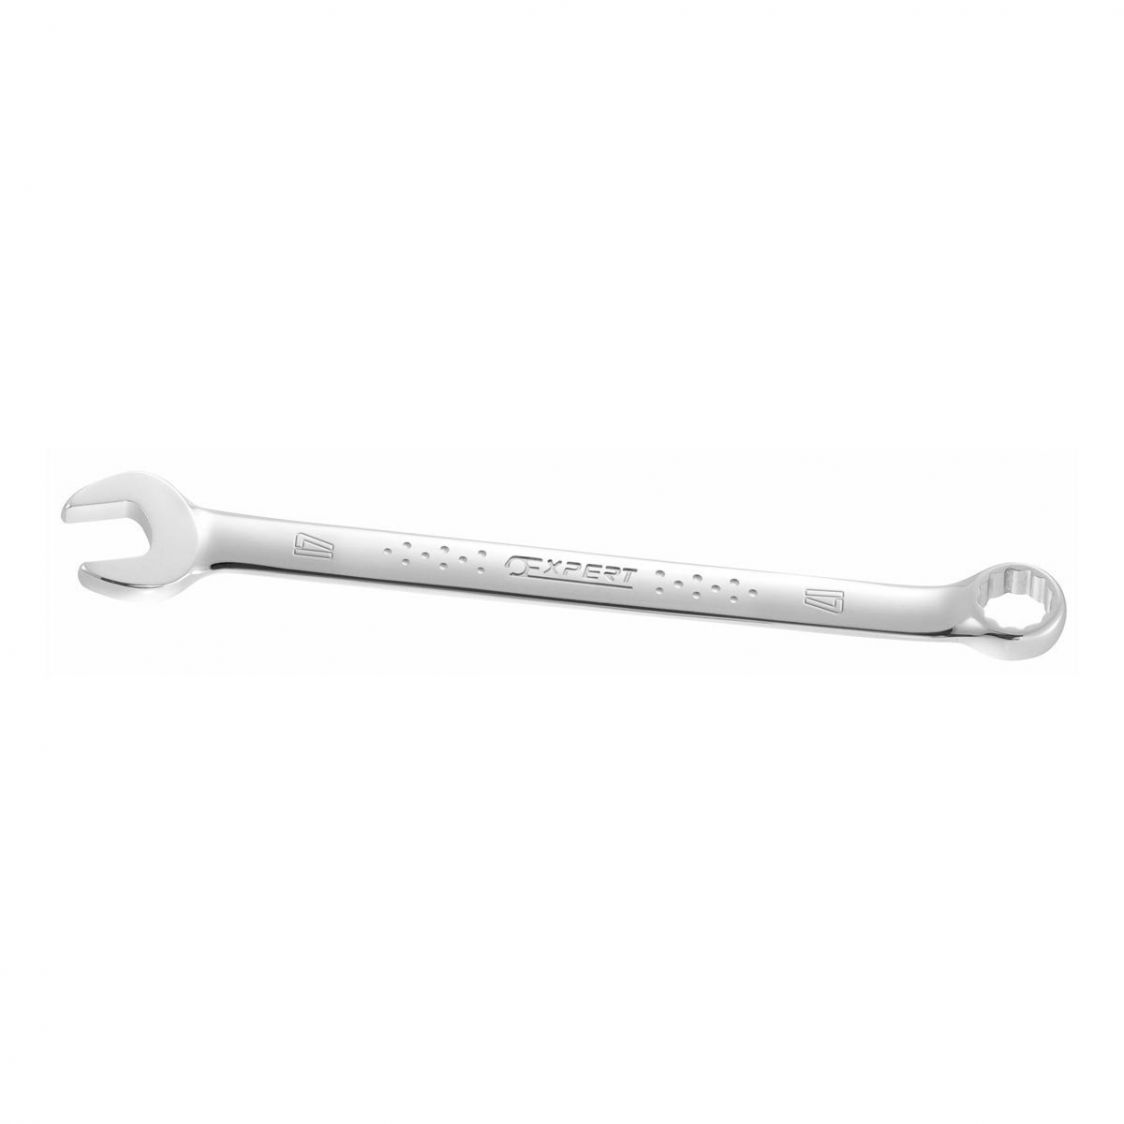 EXPERT by FACOM E117713 - 35mm Metric Long Combination Spanner